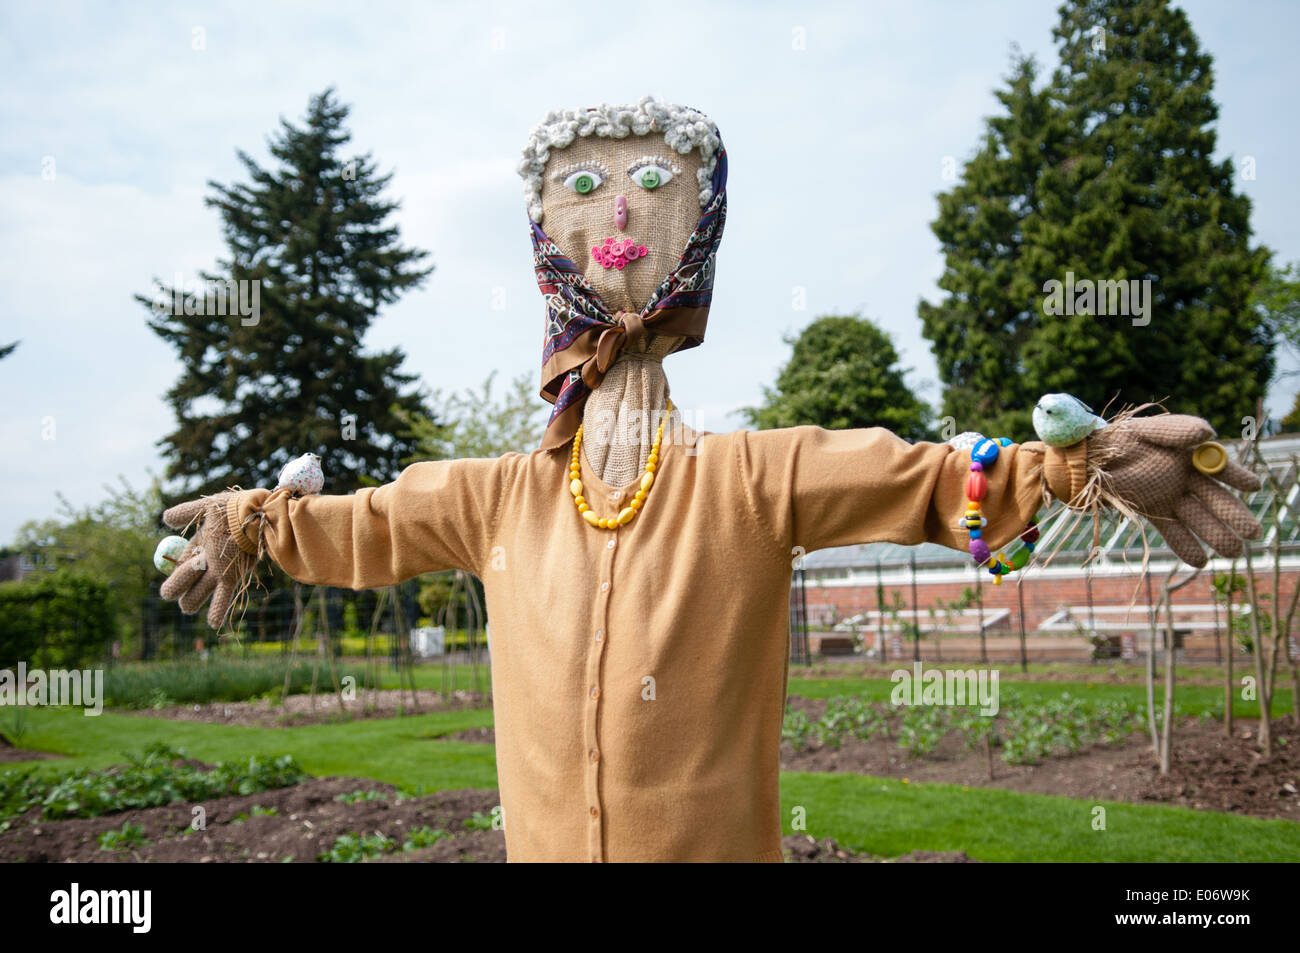 Cute old lady scarecrow wearing pearls, a head scarf and cardigan in the walled garden at National Trust house Wightwick Manor Stock Photo